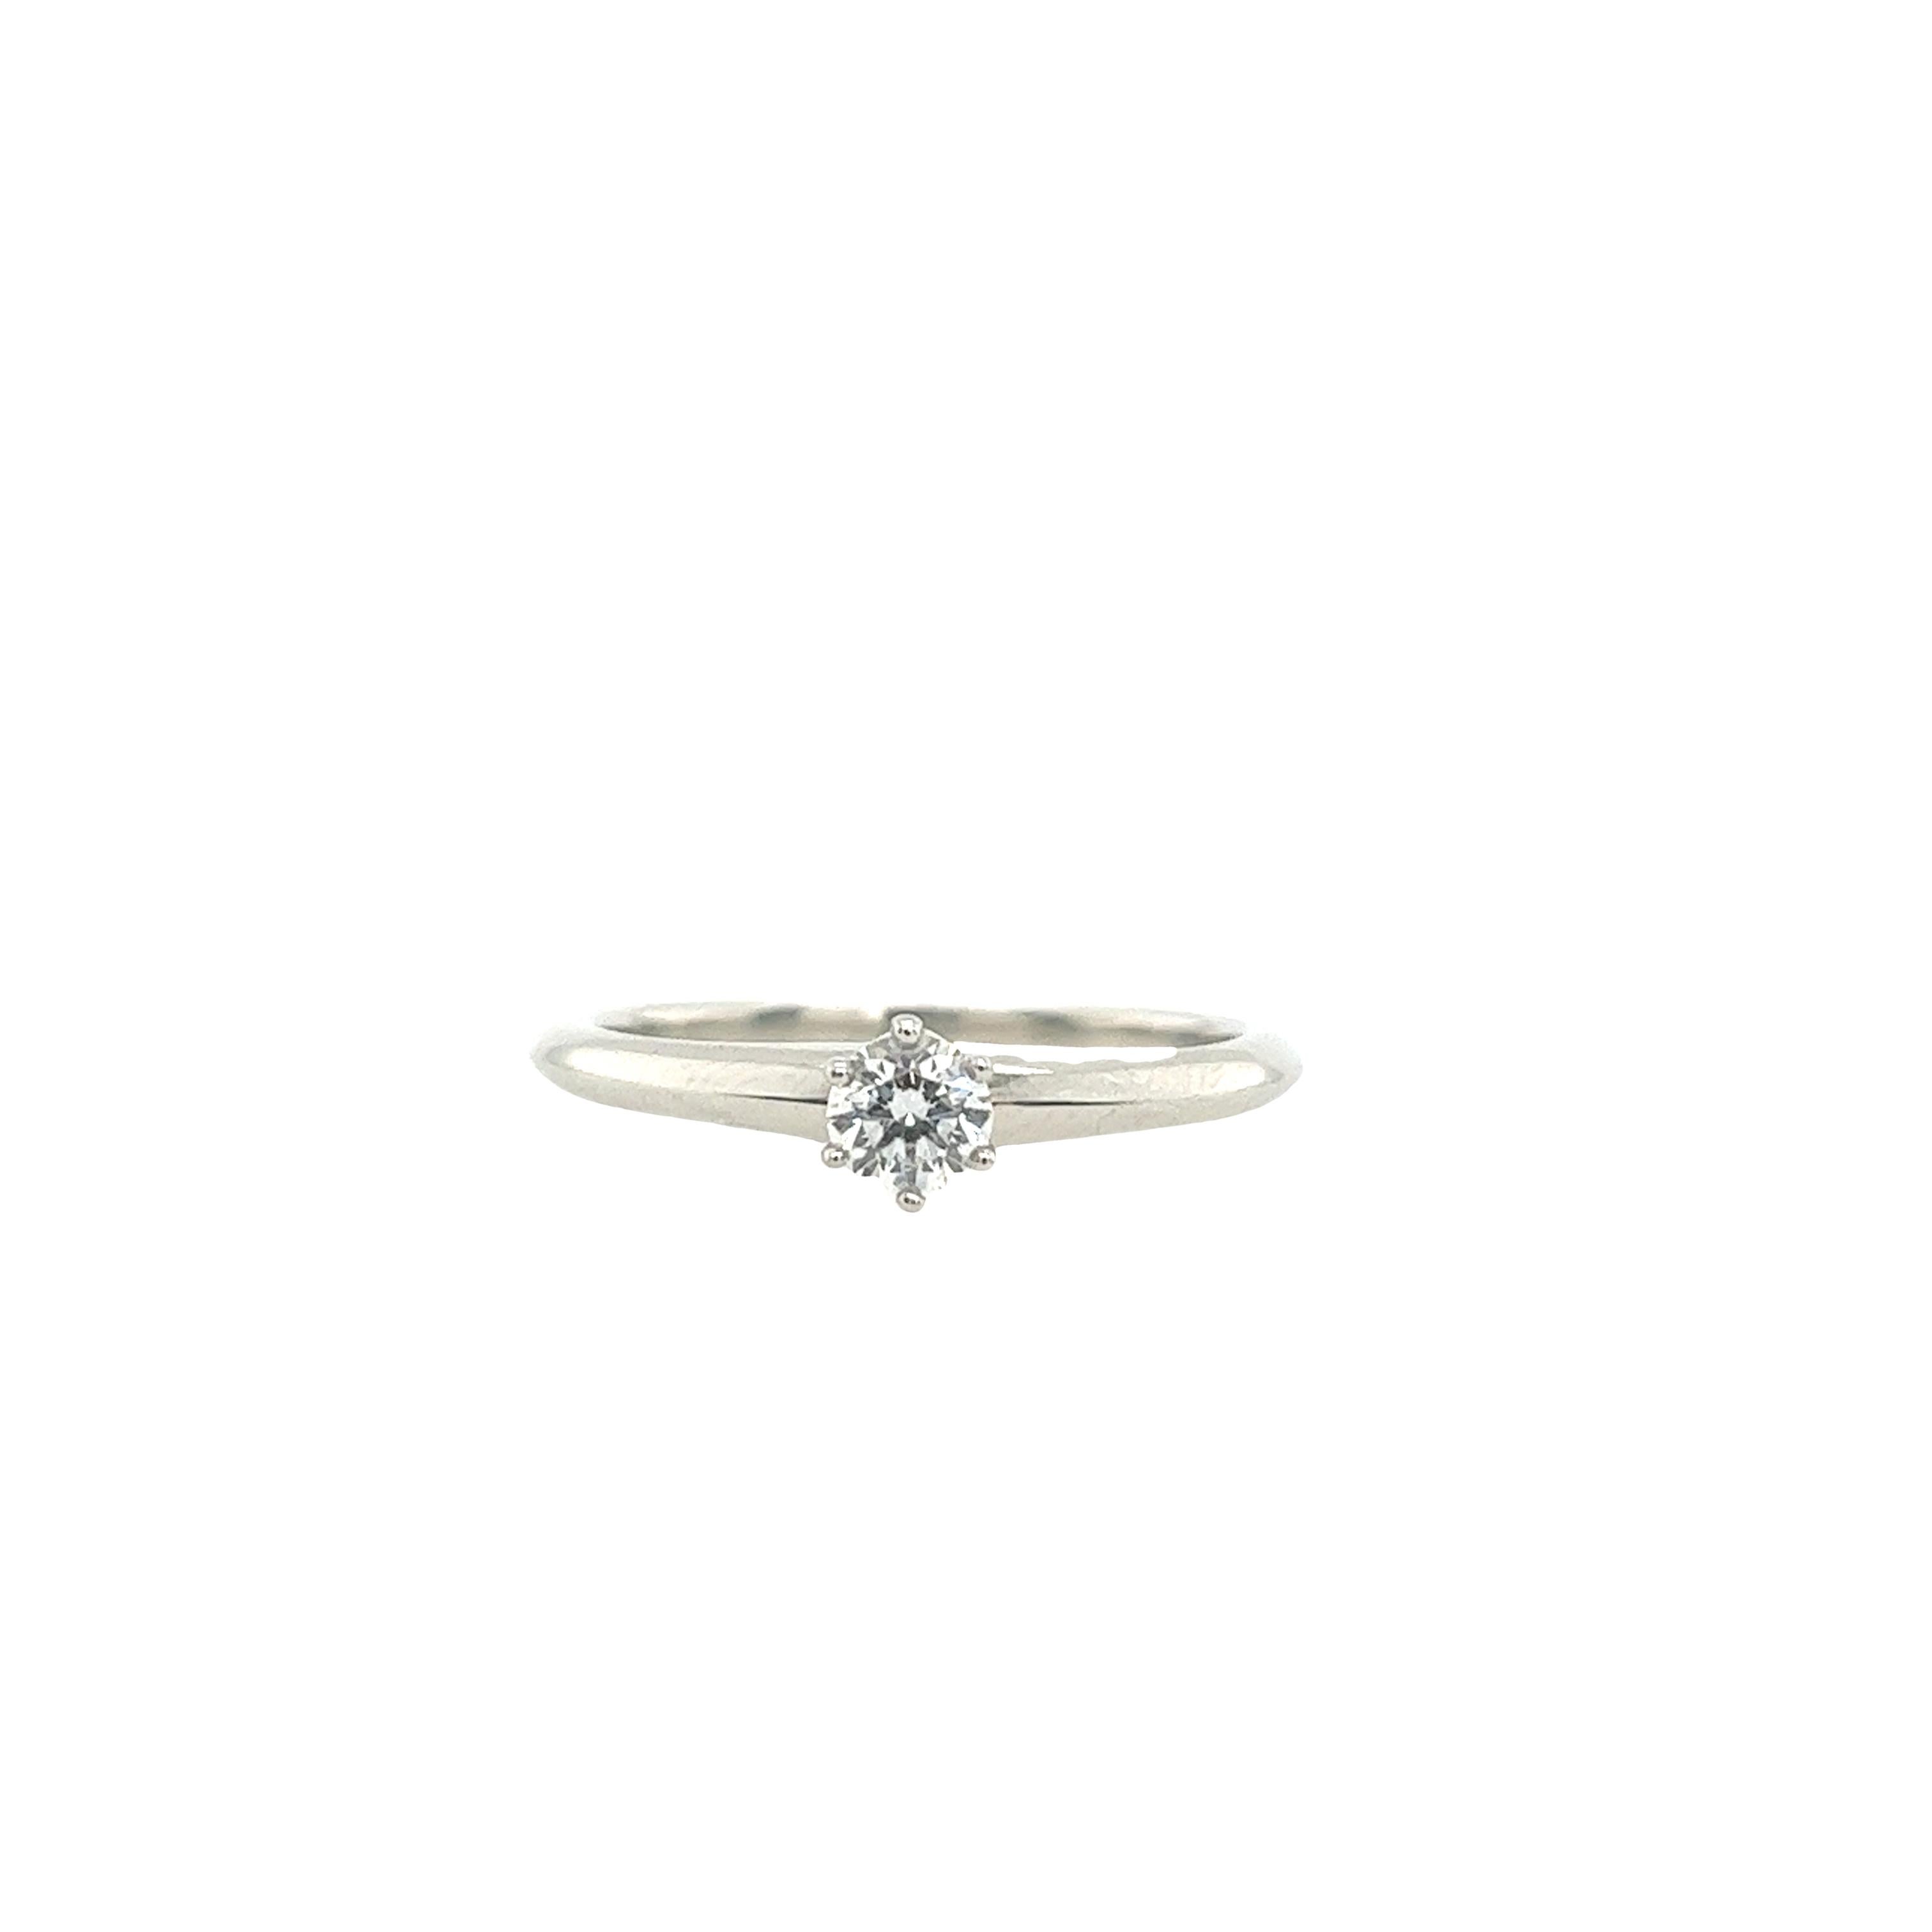 Tiffany & Co. Platinum Solitaire Diamond Engagement Ring set with 0.24ct Diamond For Sale 3